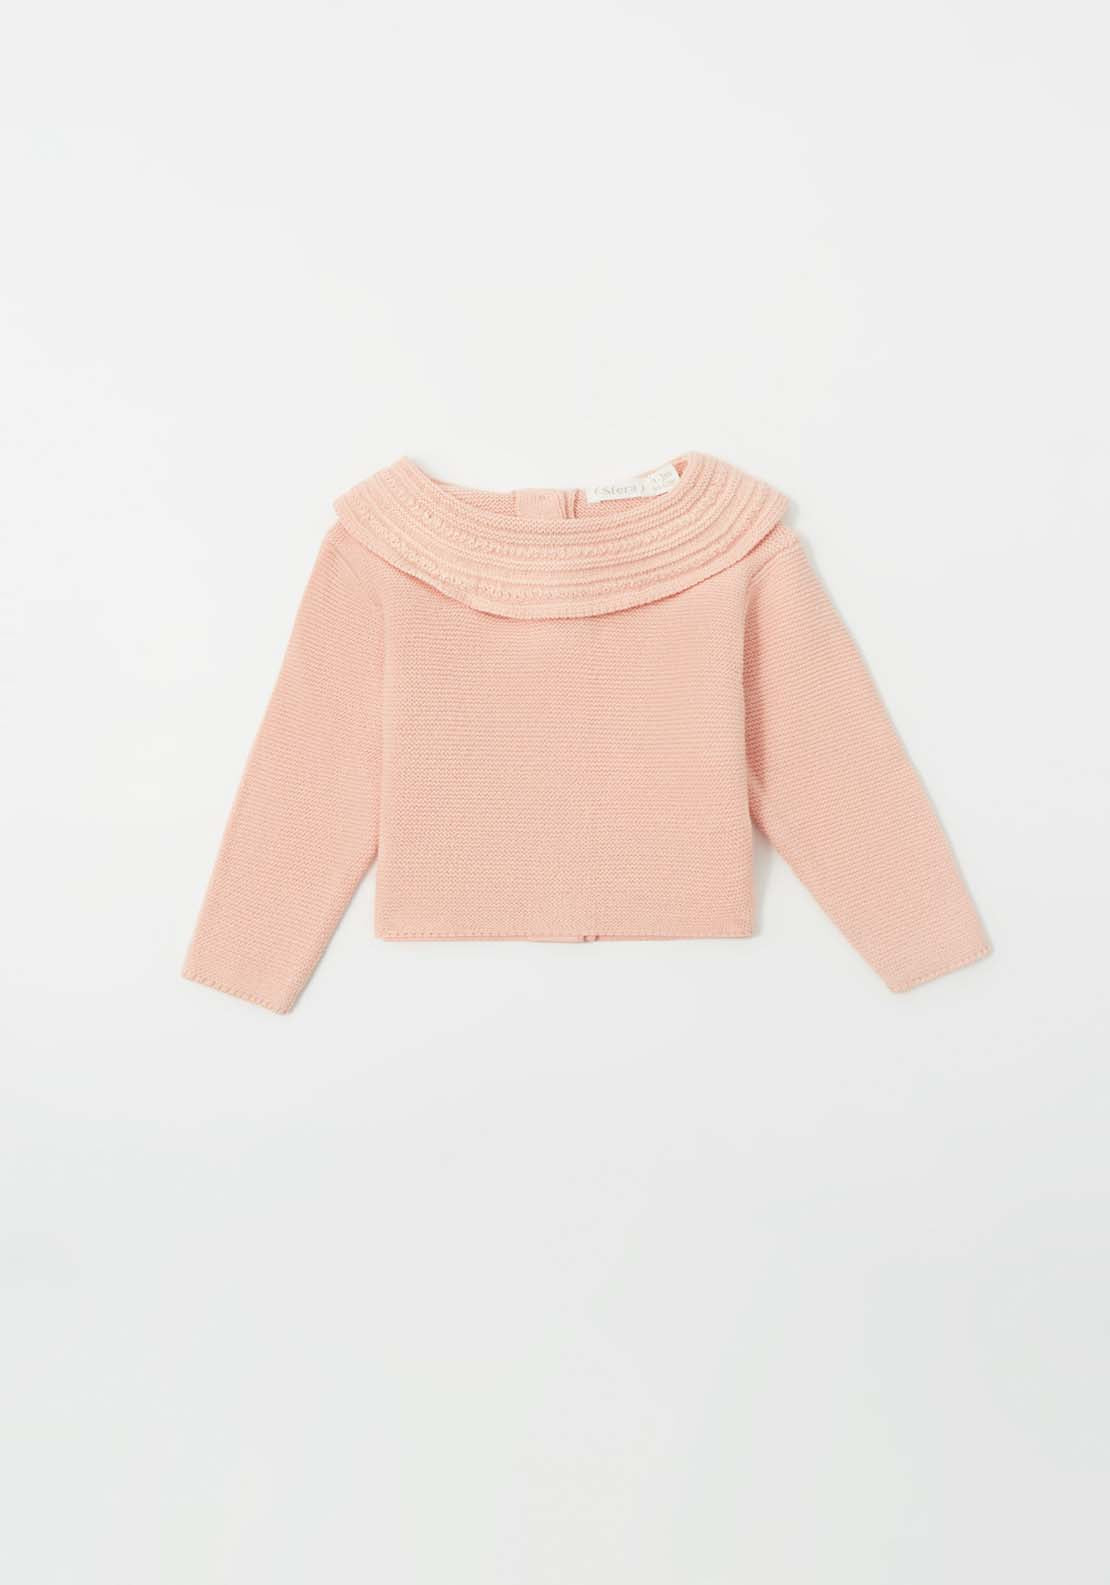 Sfera Ruffle Neck Knit Top - Pink 1 Shaws Department Stores